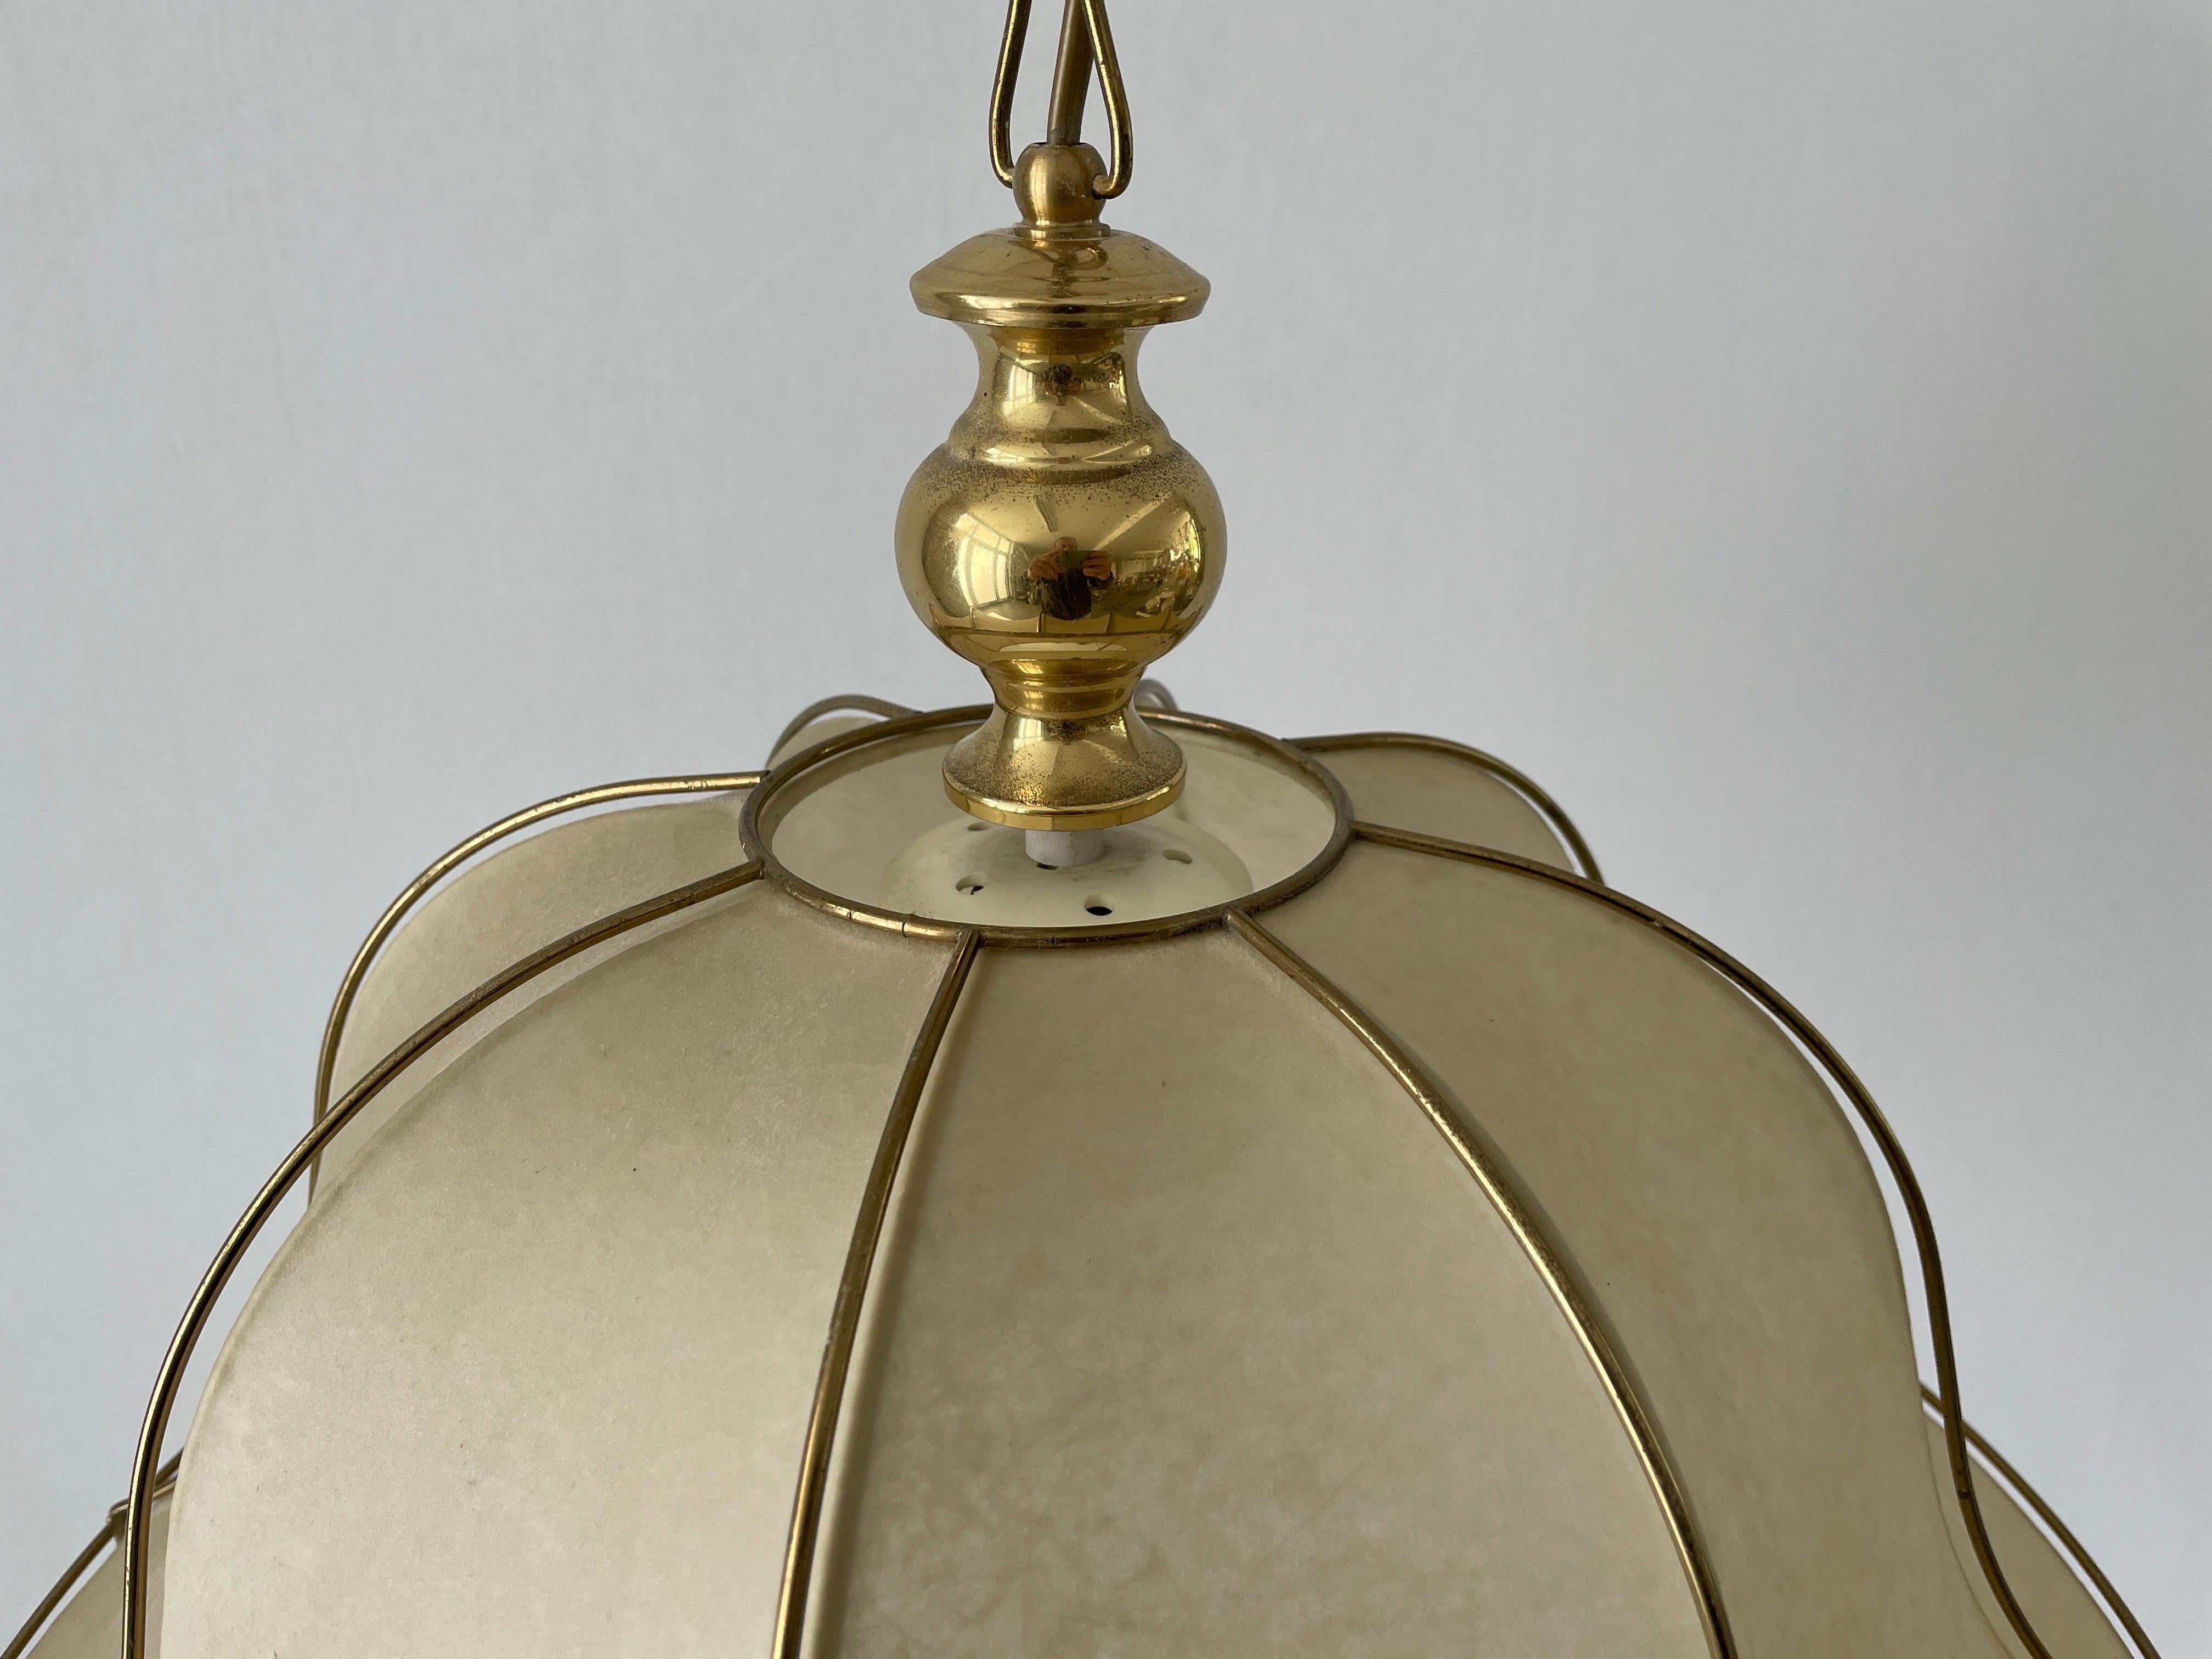 Cocoon Pendant Lamp with Gold Metal Shade Frame by Goldkant, 1960s, Germany For Sale 1